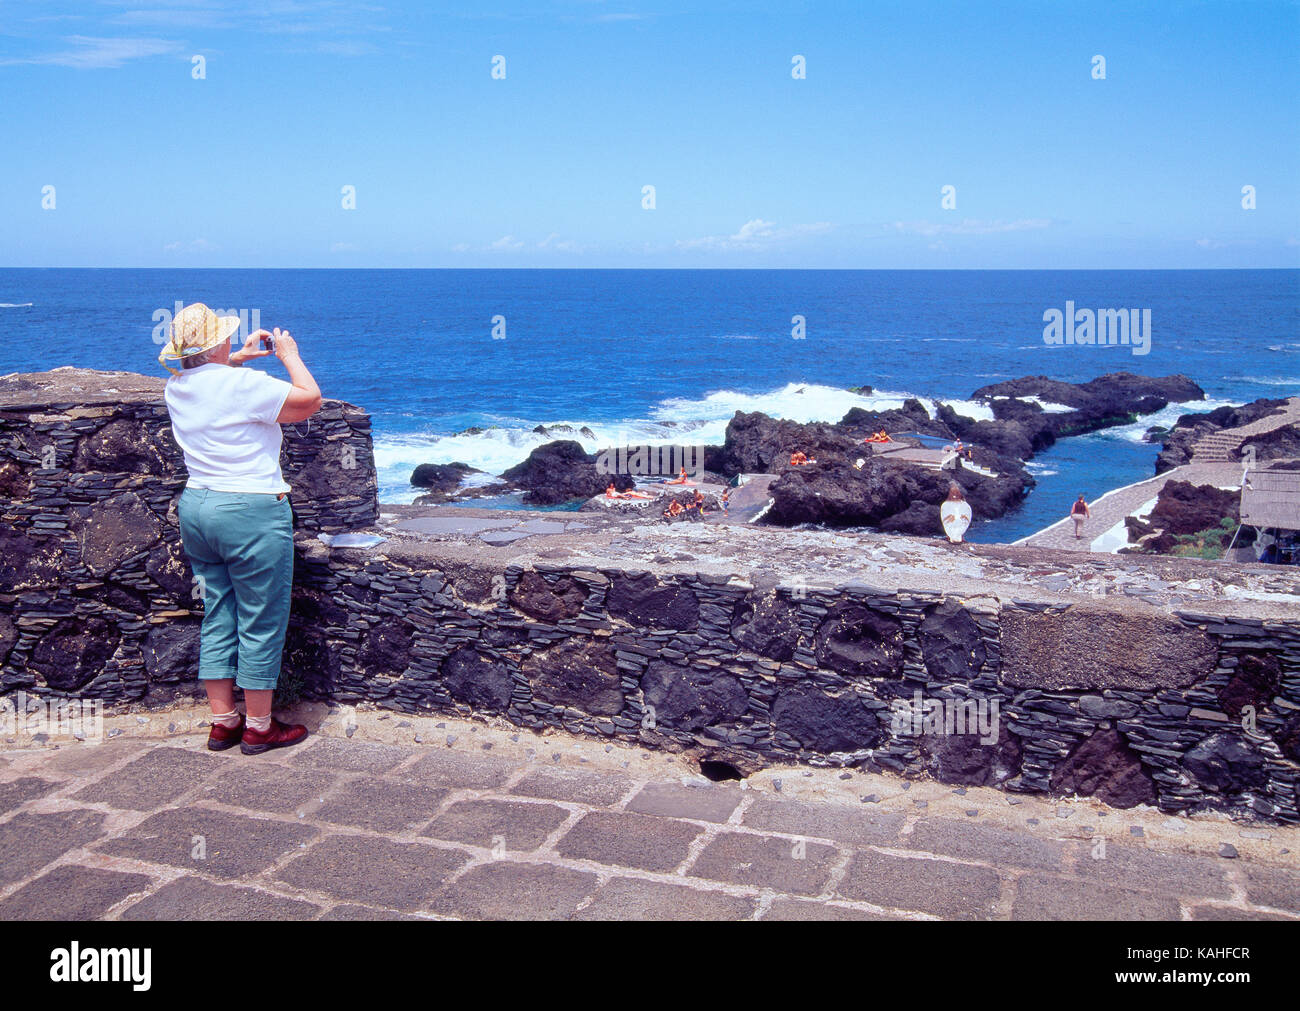 Elderly woman taking photos from the viewpoint. Garachico, Tenerife, Canary Islands, Spain. Stock Photo